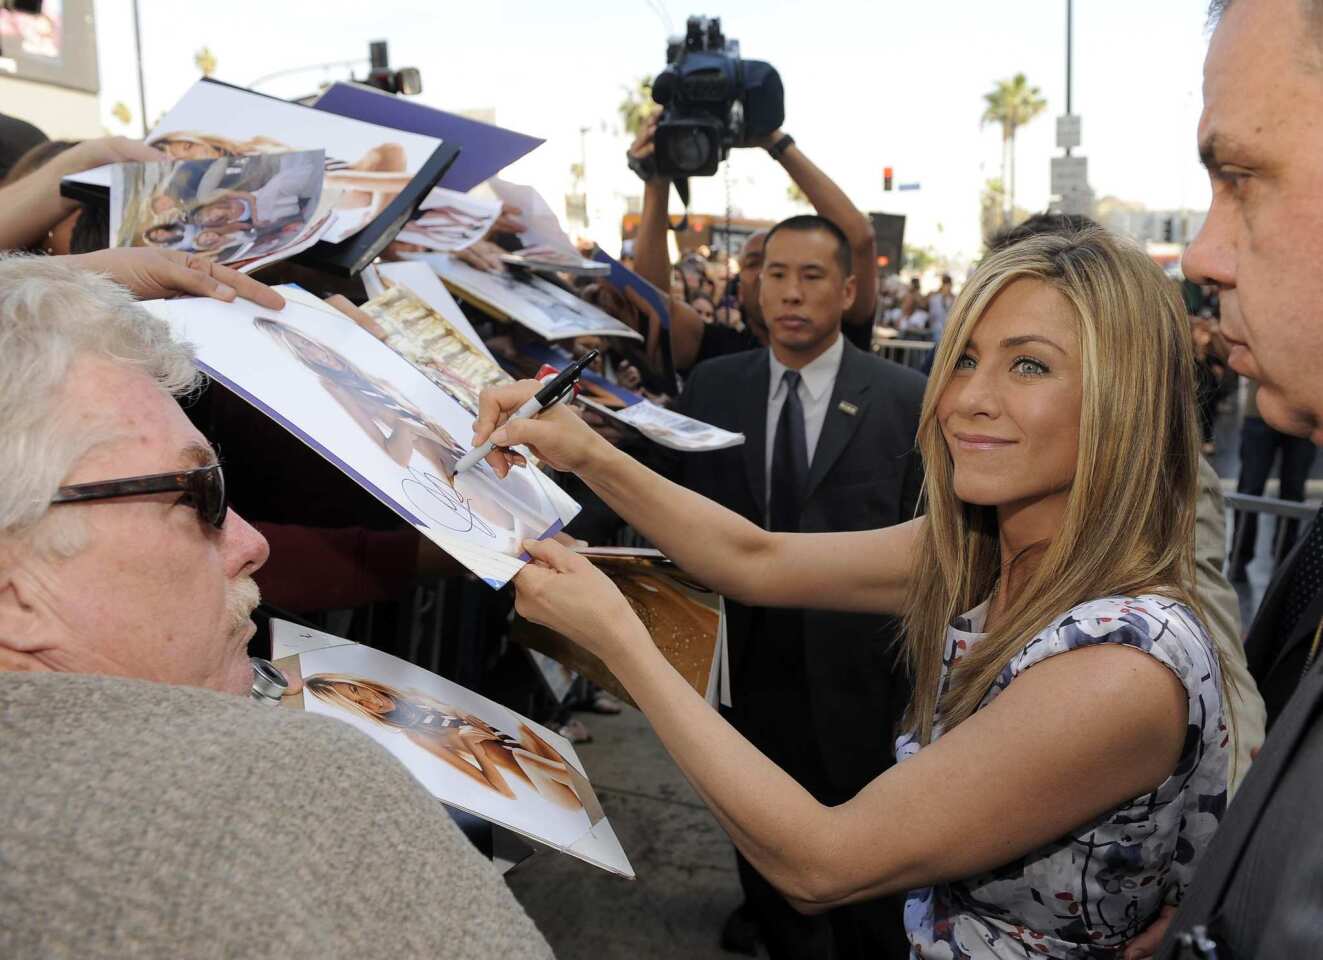 Jennifer Aniston signs autographs for fans in Hollywood.